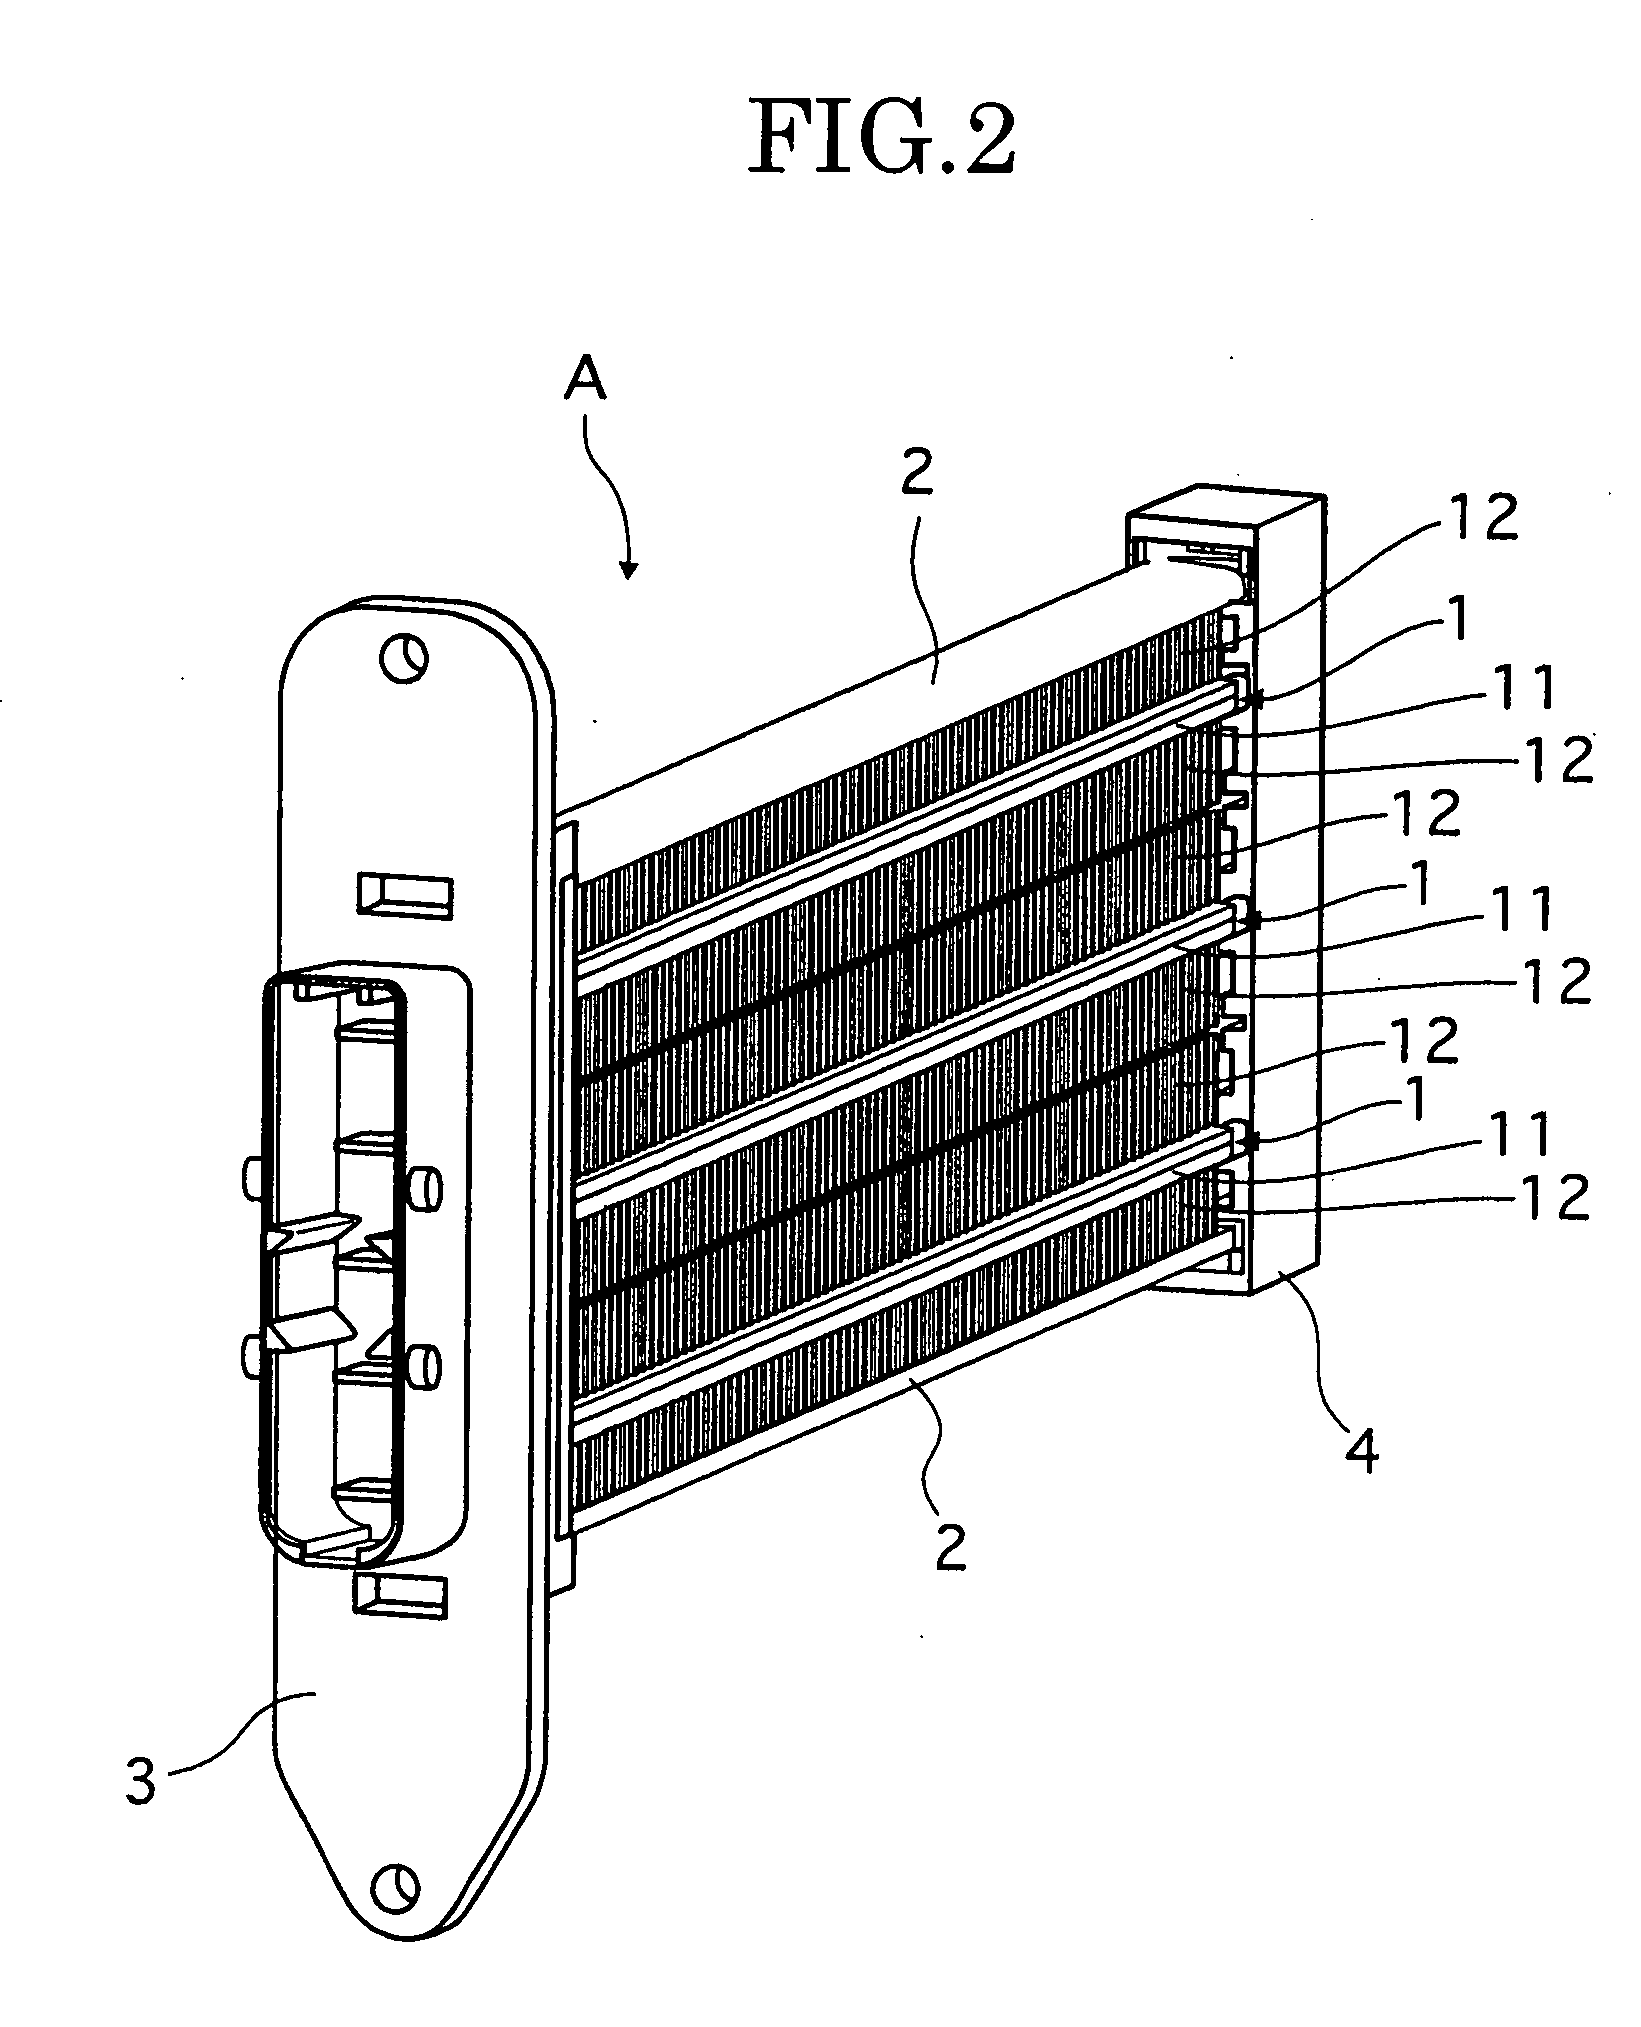 Electrical heating apparatus, method of manufacturing heat generator unit and pressing jig for use in manufacturing thereof